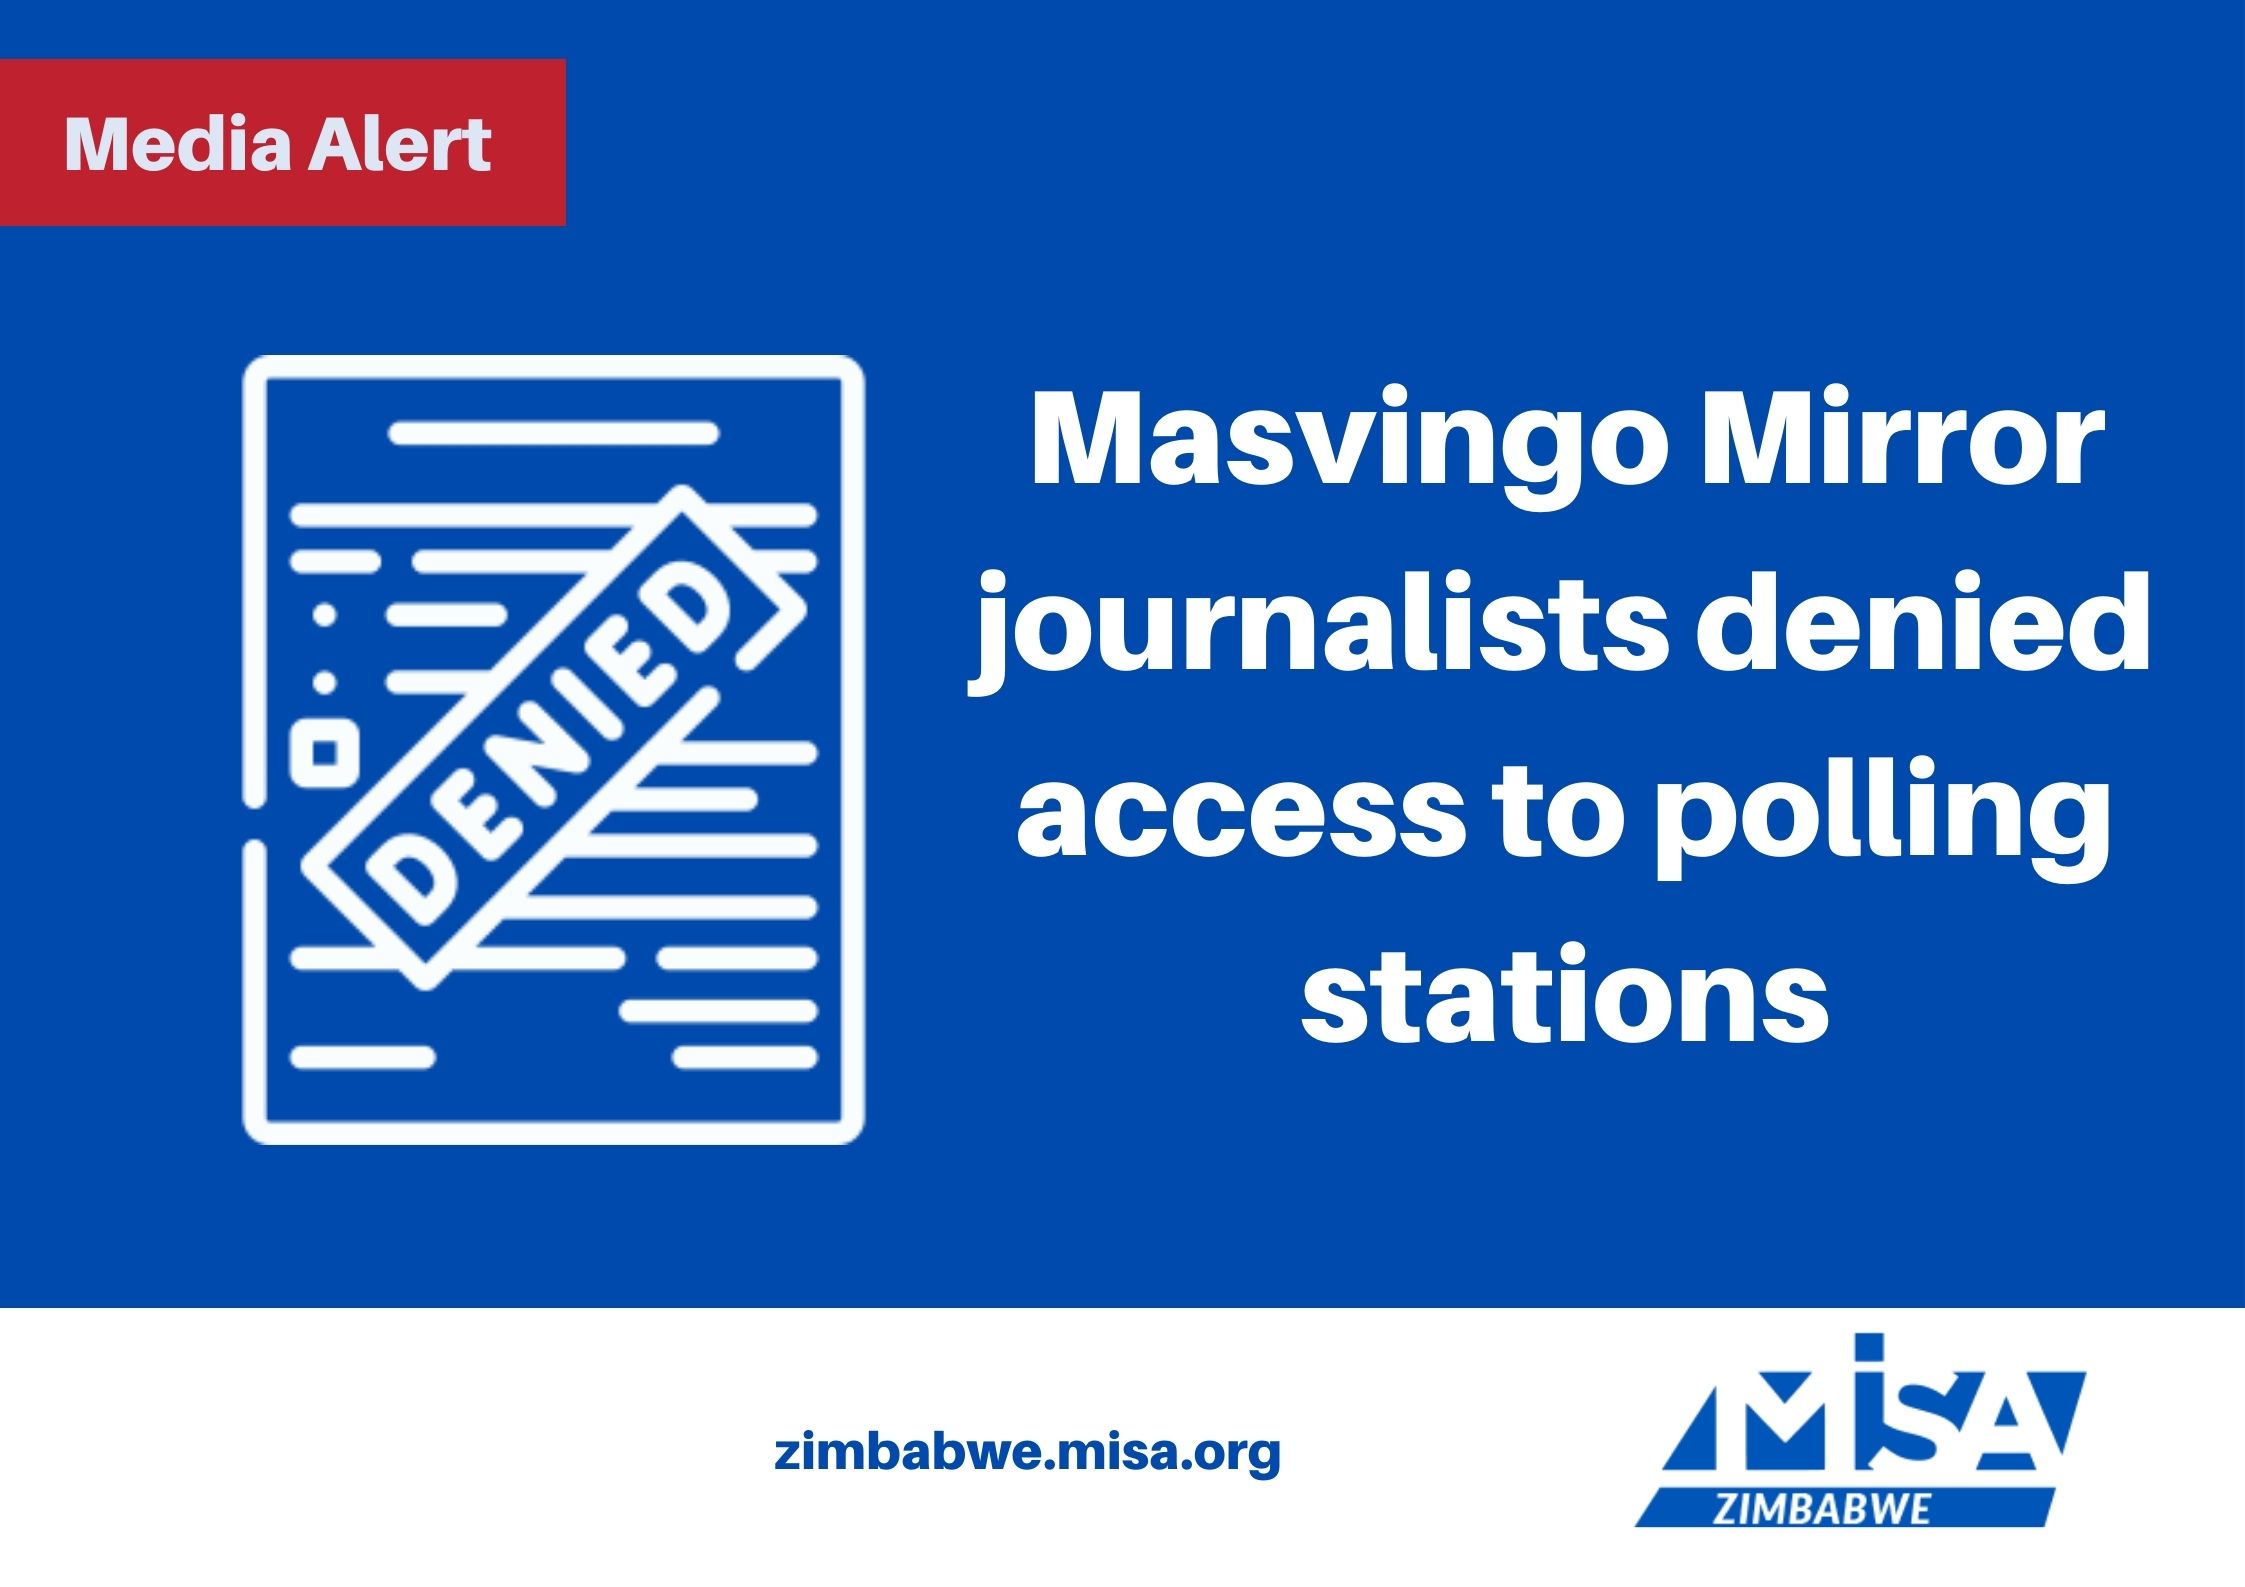 Masvingo Mirror journalists denied access to polling stations